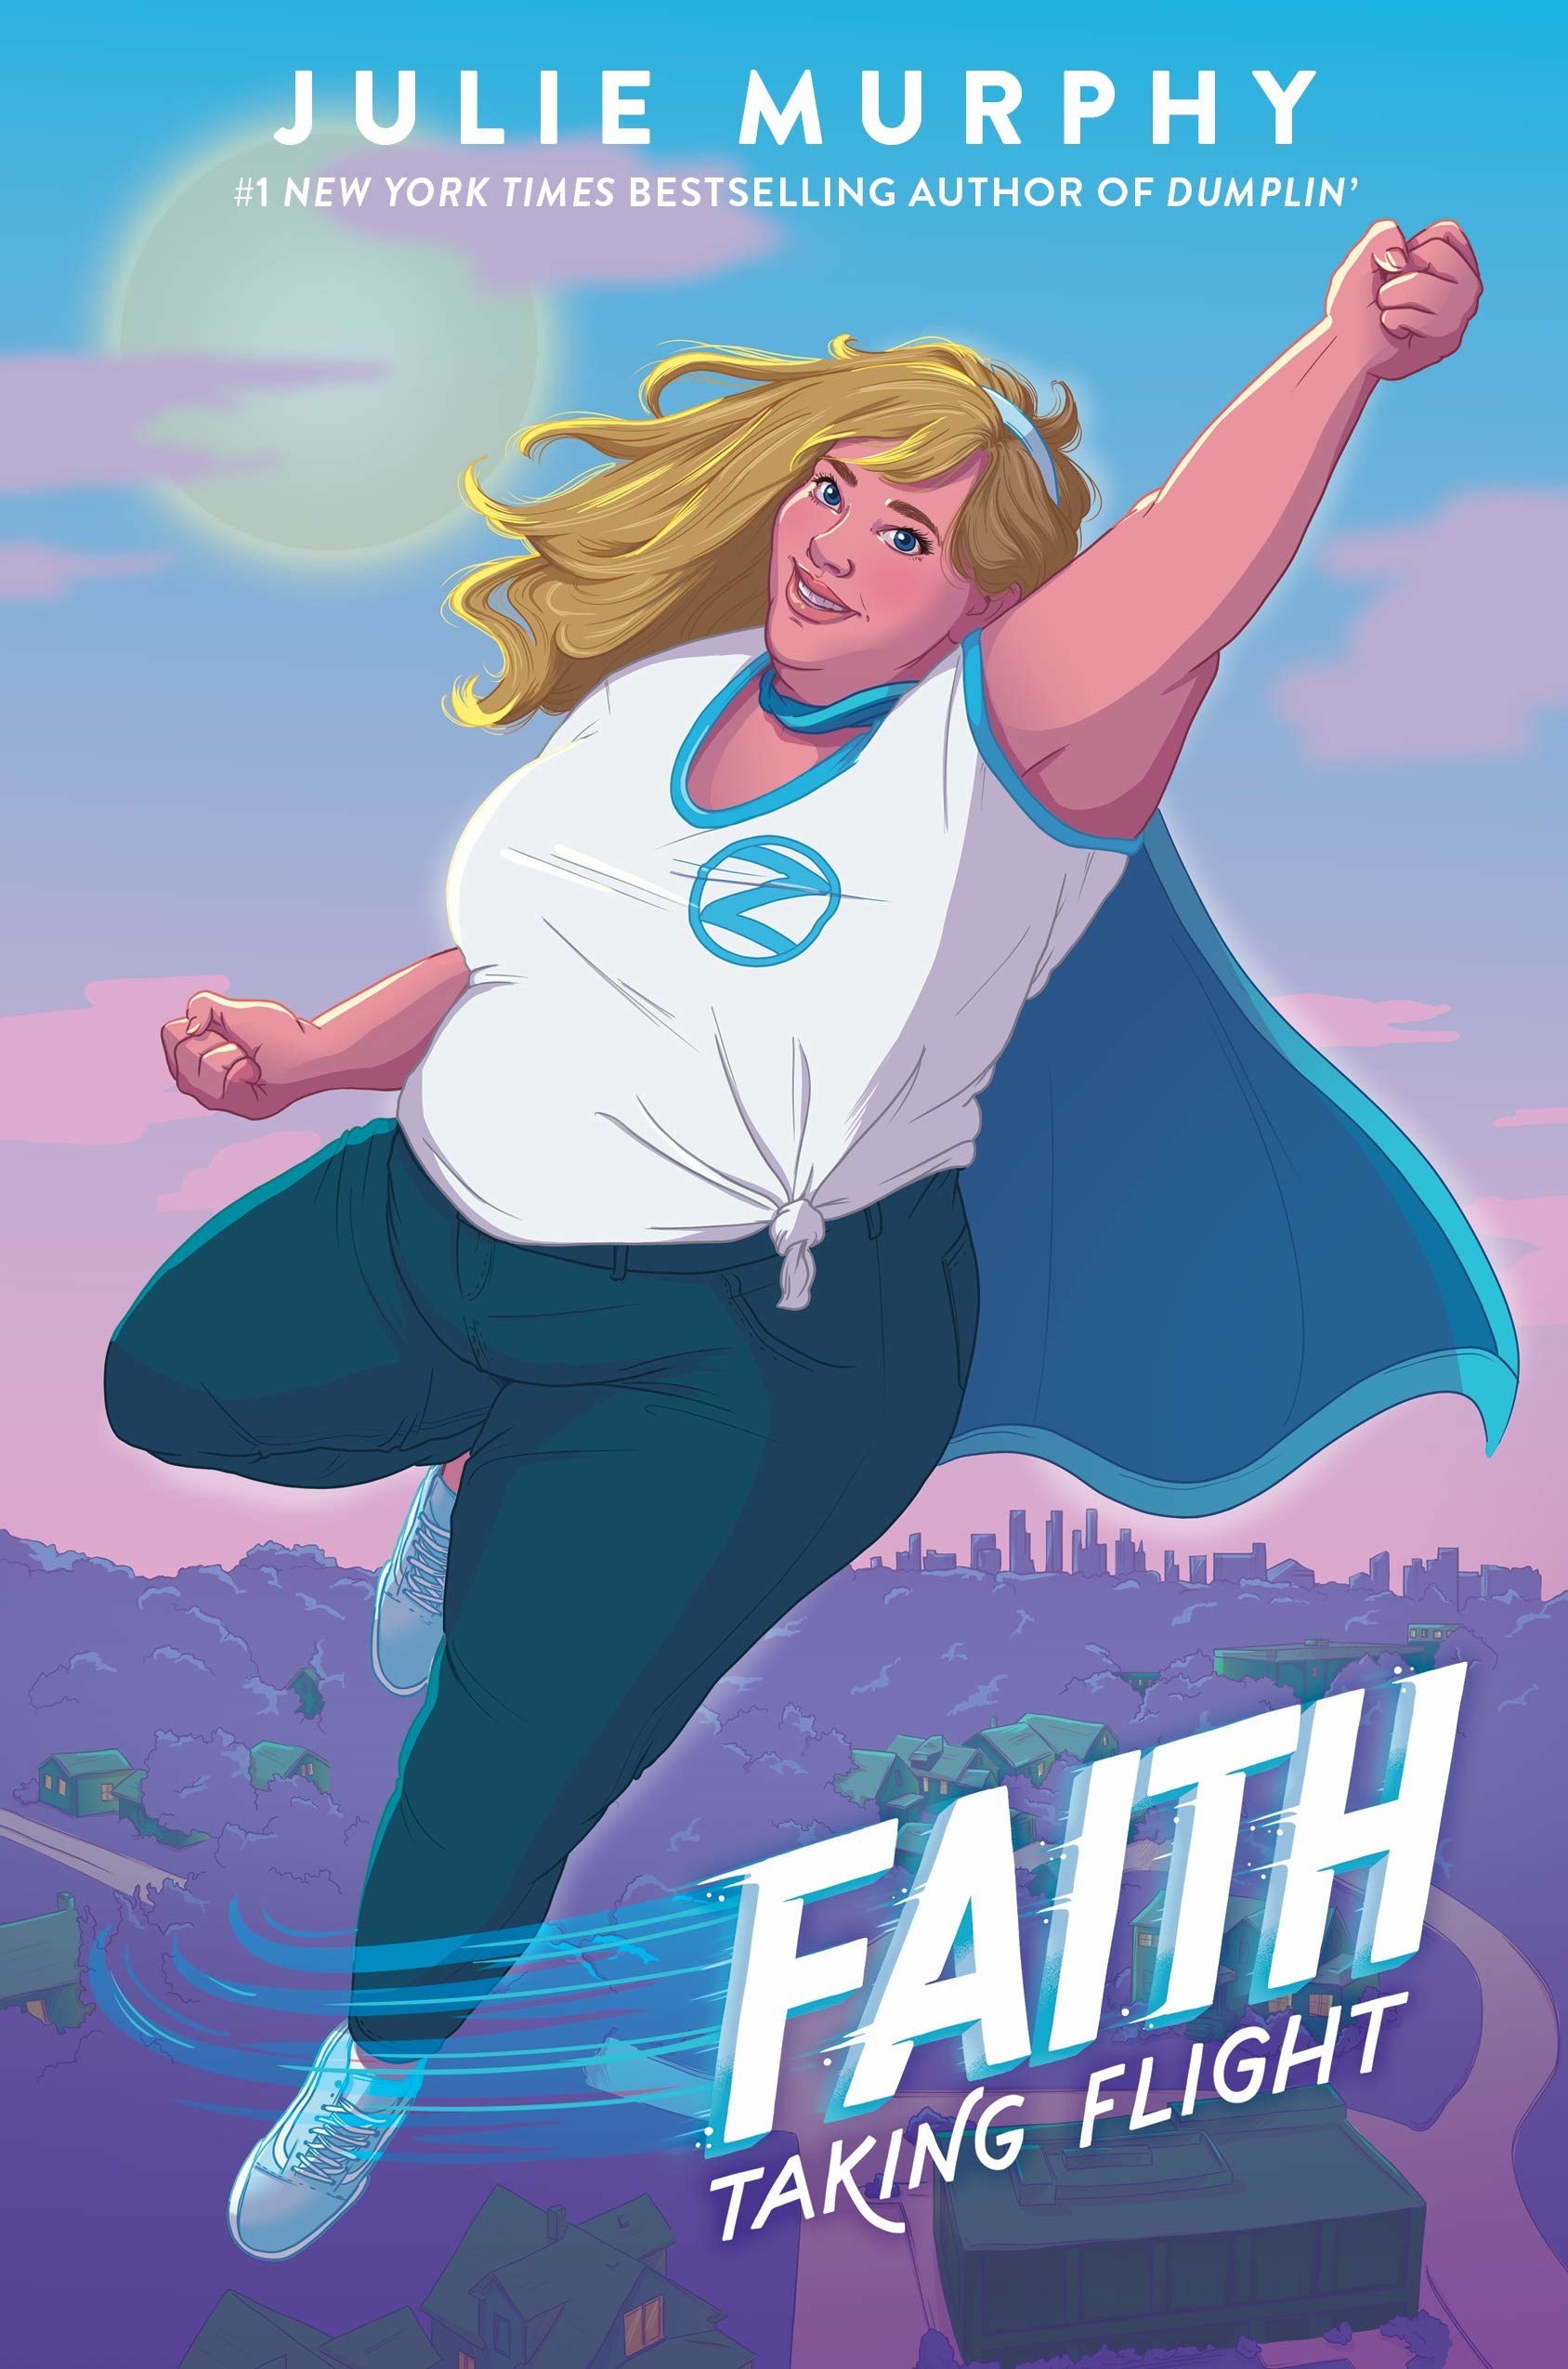 A young curvy girl is wearing a cape and flying.